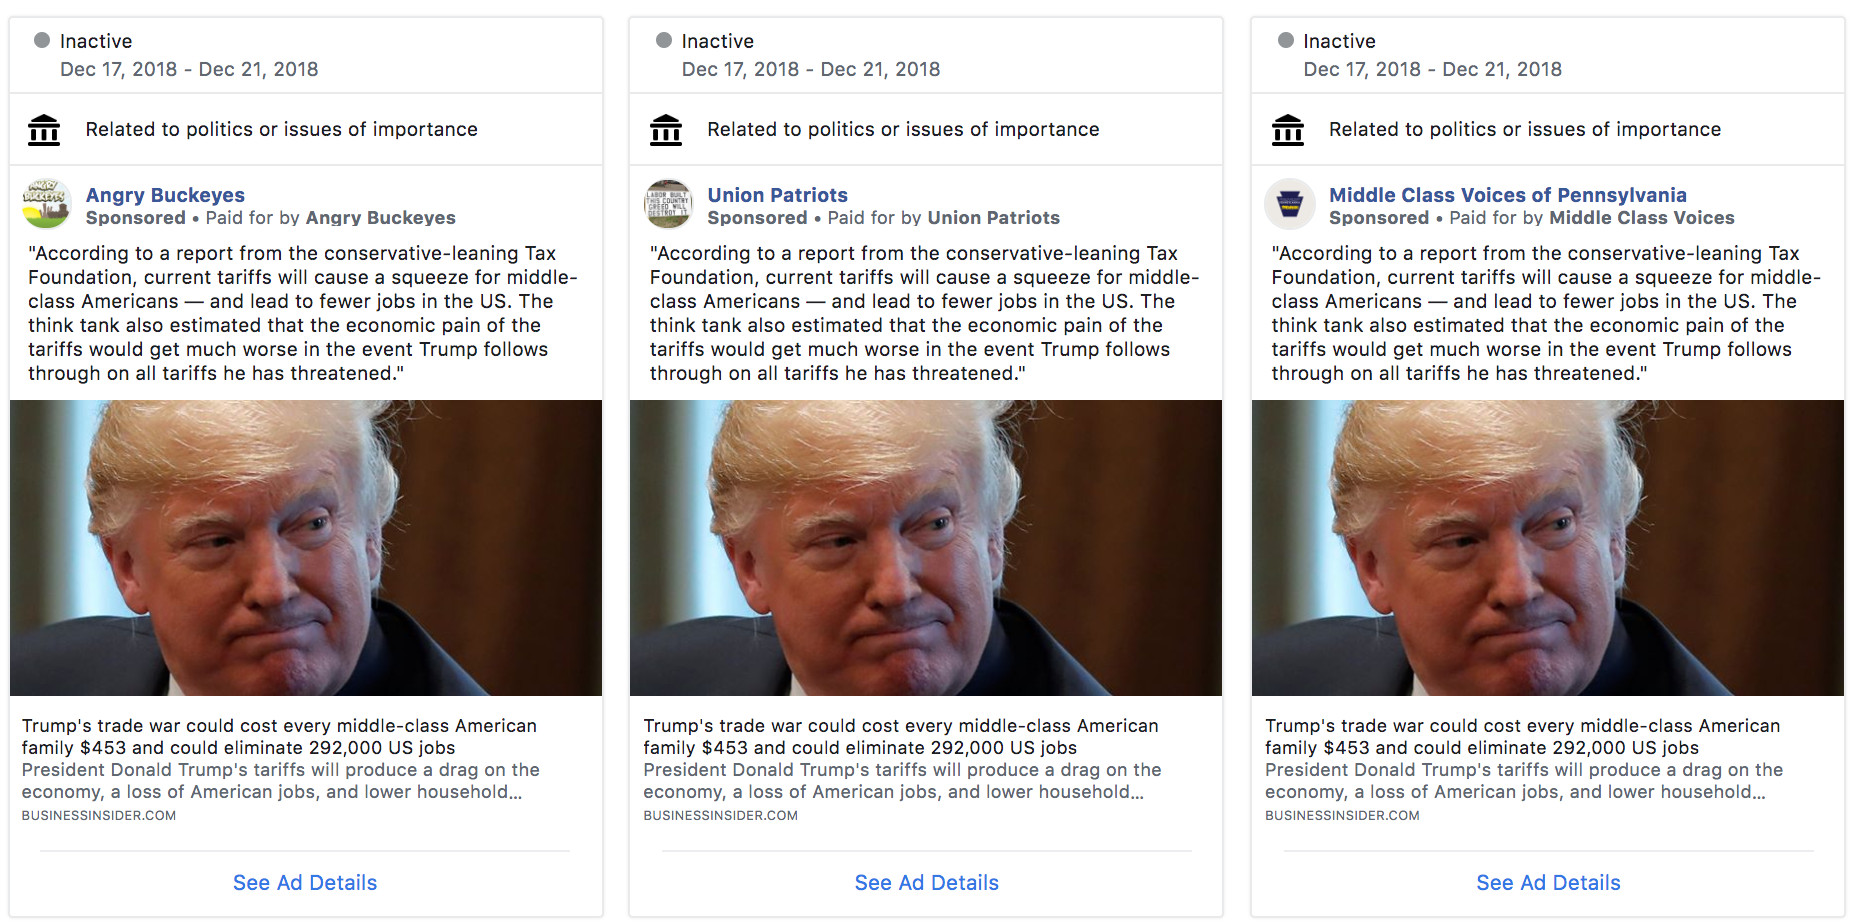 Three identical Facebook ads from different Pages